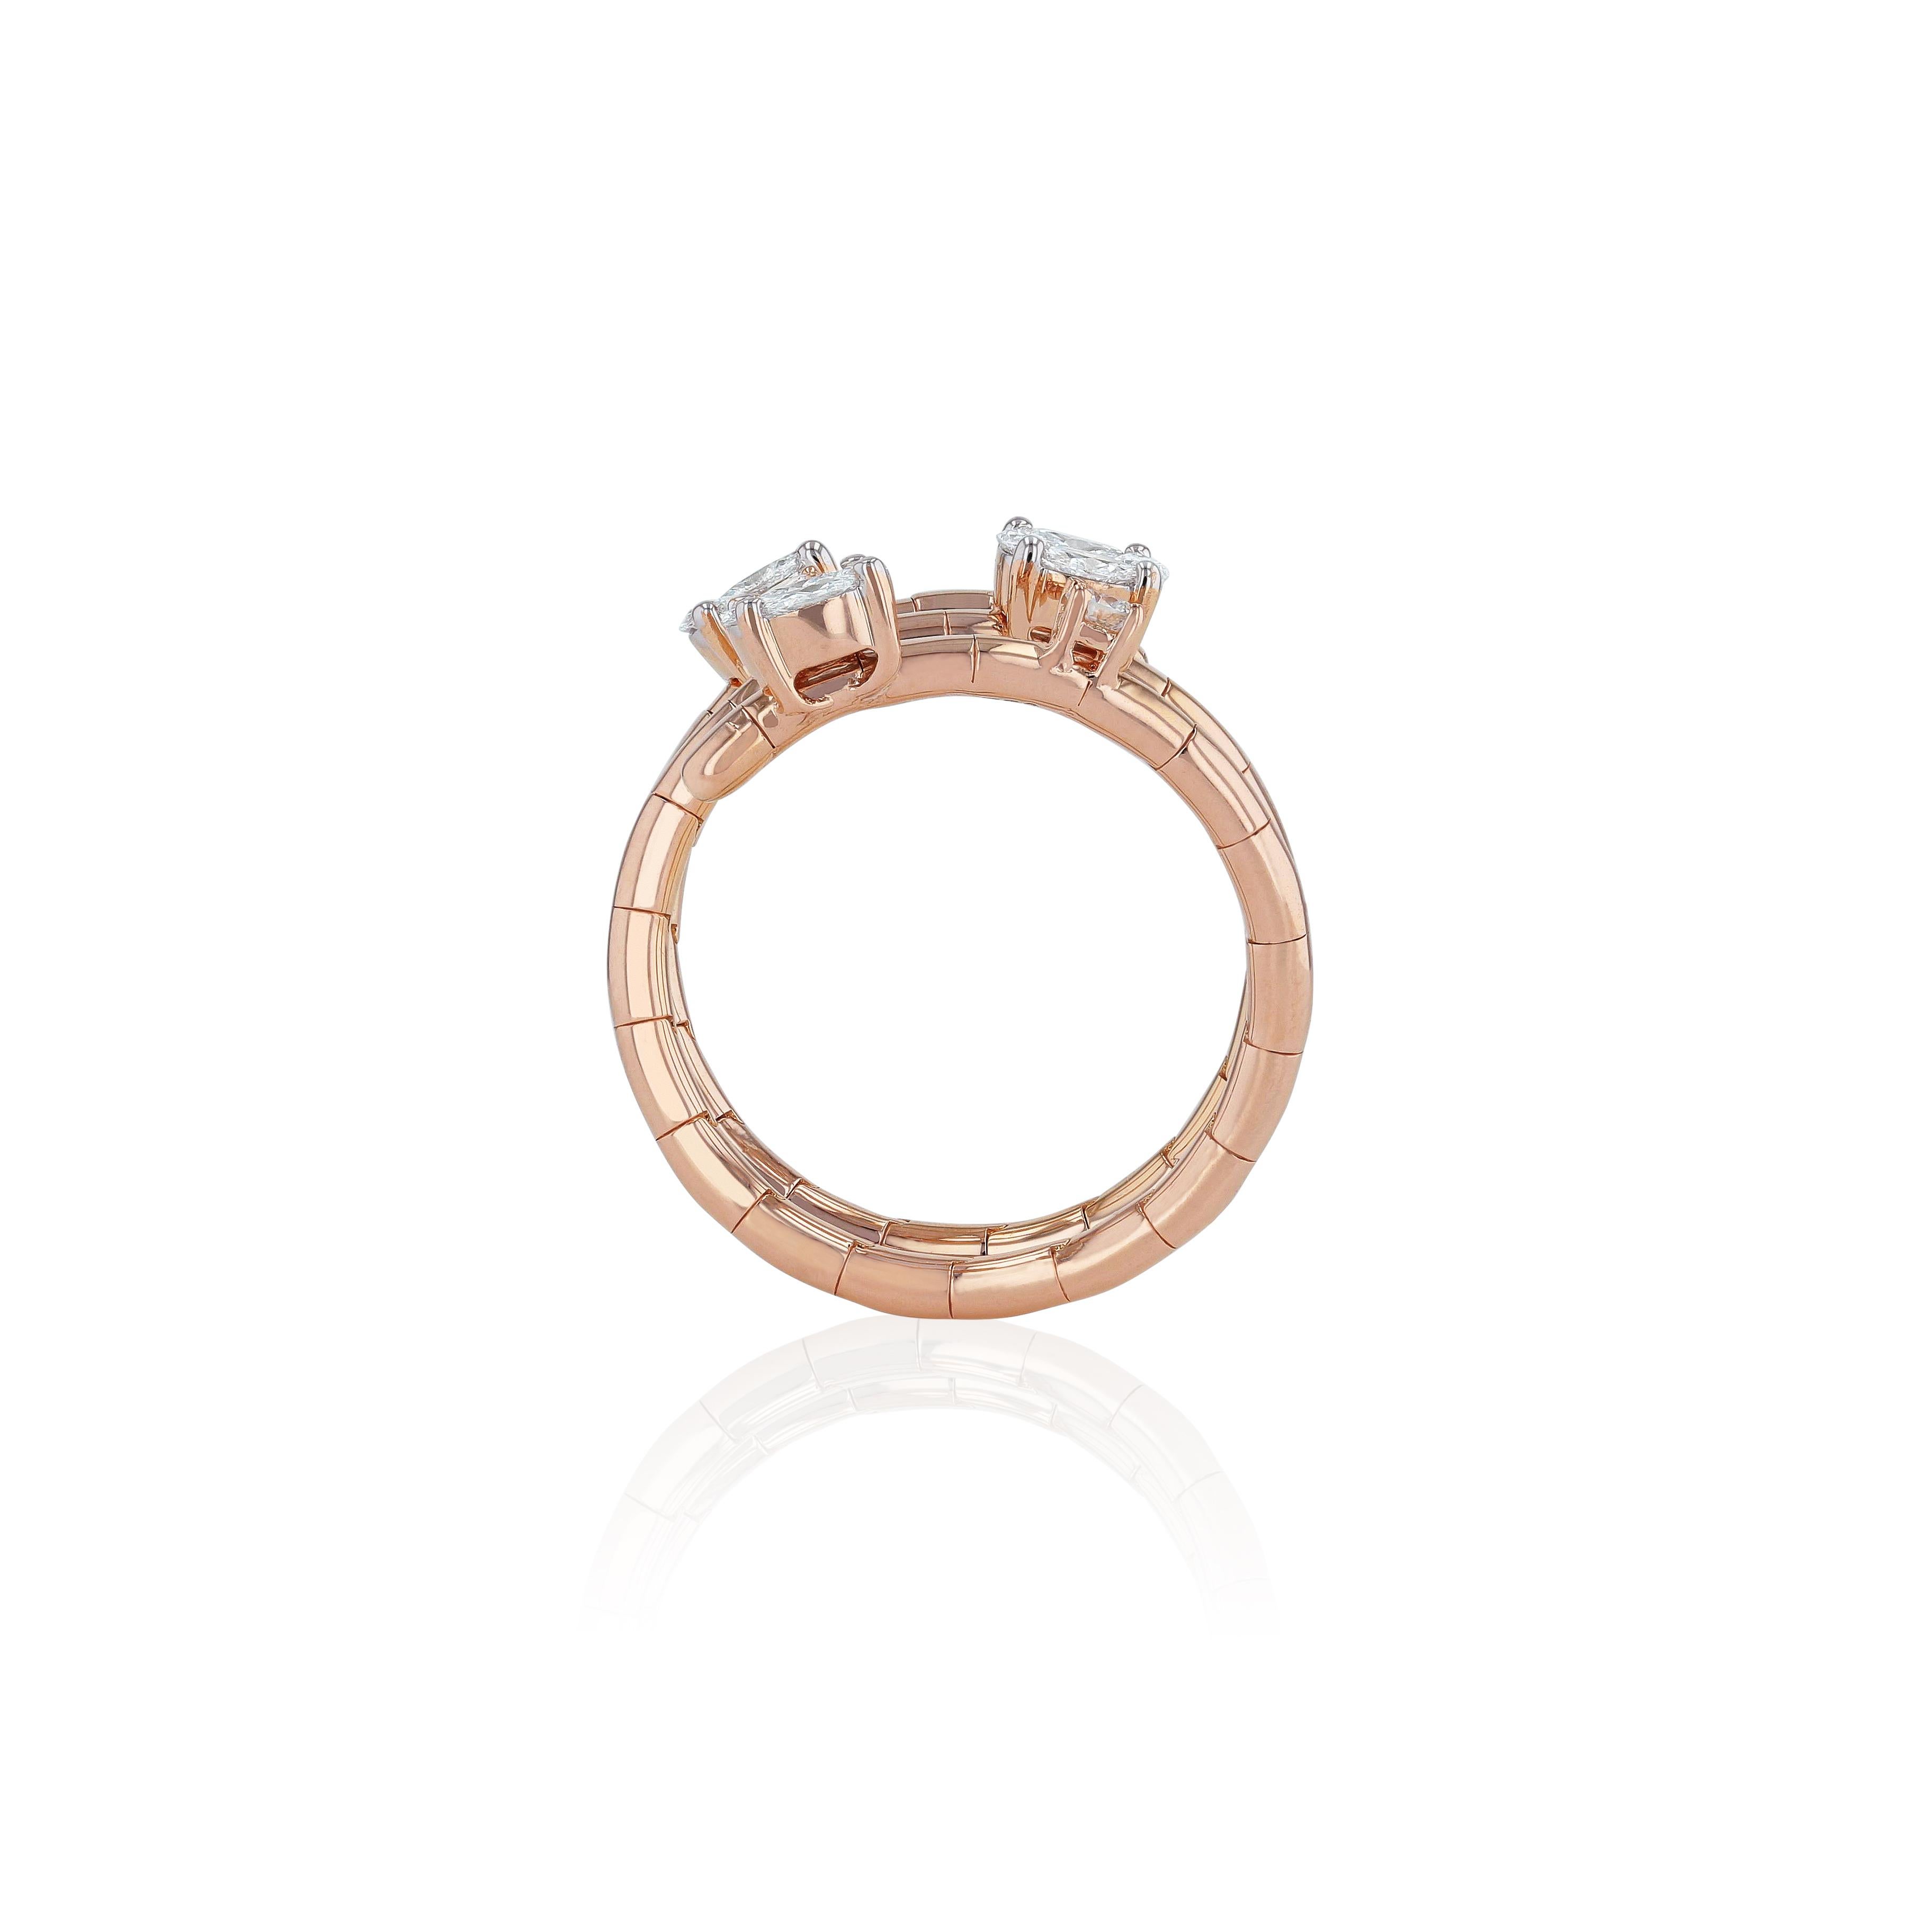 A contemporary design celebrating our imaginative masterpieces, placing 6 small to medium round exquisite round diamonds either side of the finger, arranged into potent layers of rose gold. 
Diamond Clarity: VS SI / G H COLOR 
Diamonds (Total Carat